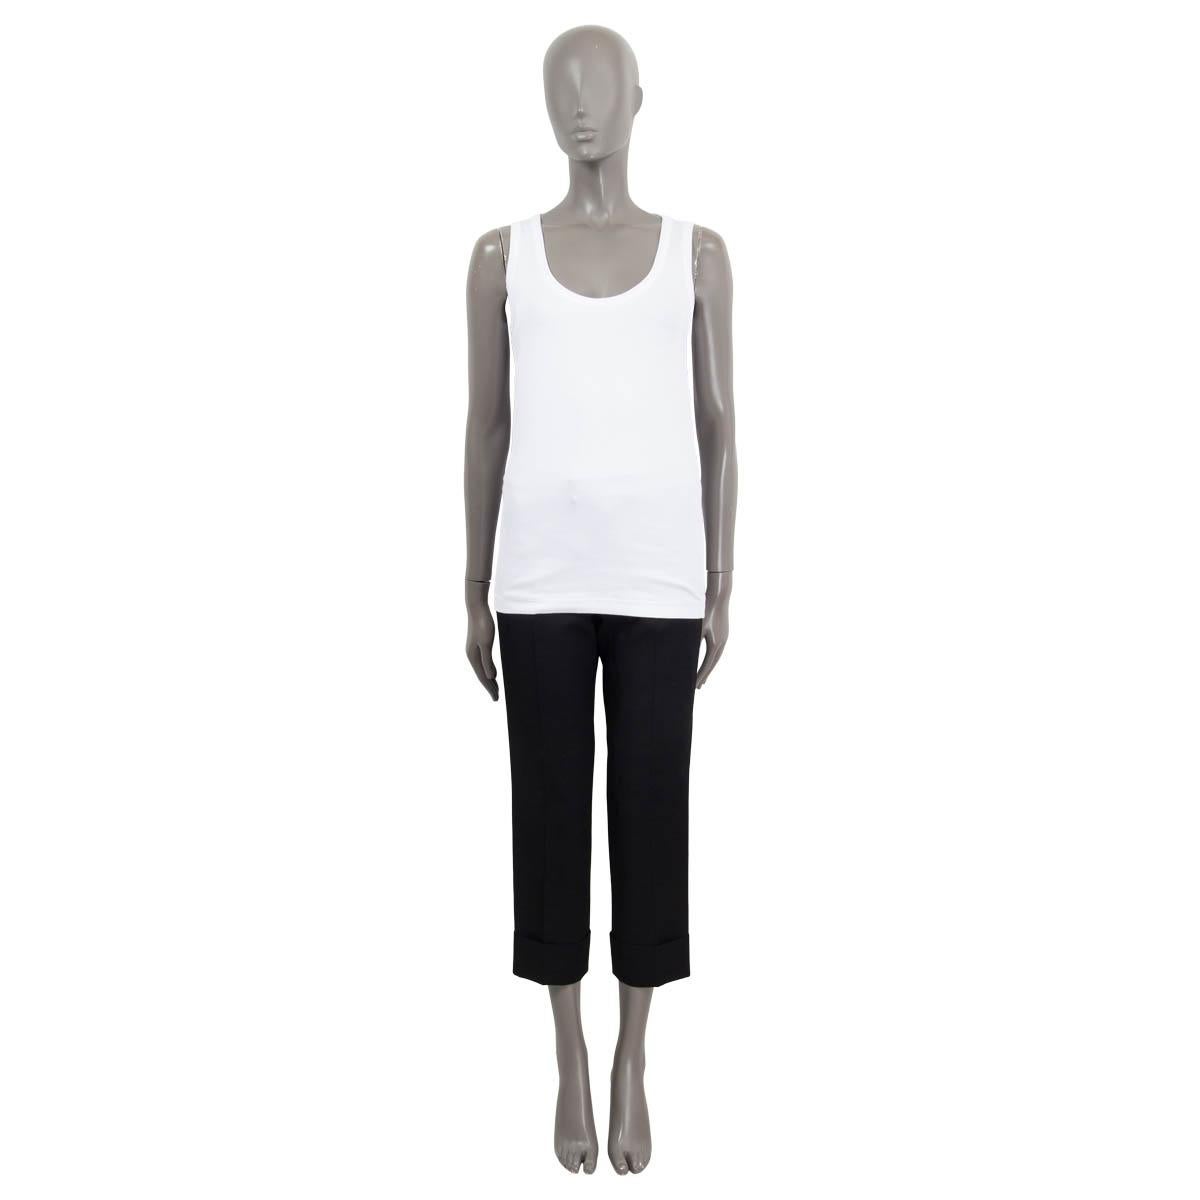 100% authentic Brunello Cucinelli rib-knit jersey tank-top in white cotton (with 6% elastane). Features a Monili trim in the neck and scoop neck. Has been worn and is in excellent condition.

Measurements
Tag Size	XL
Size	XL
Shoulder Width	32cm